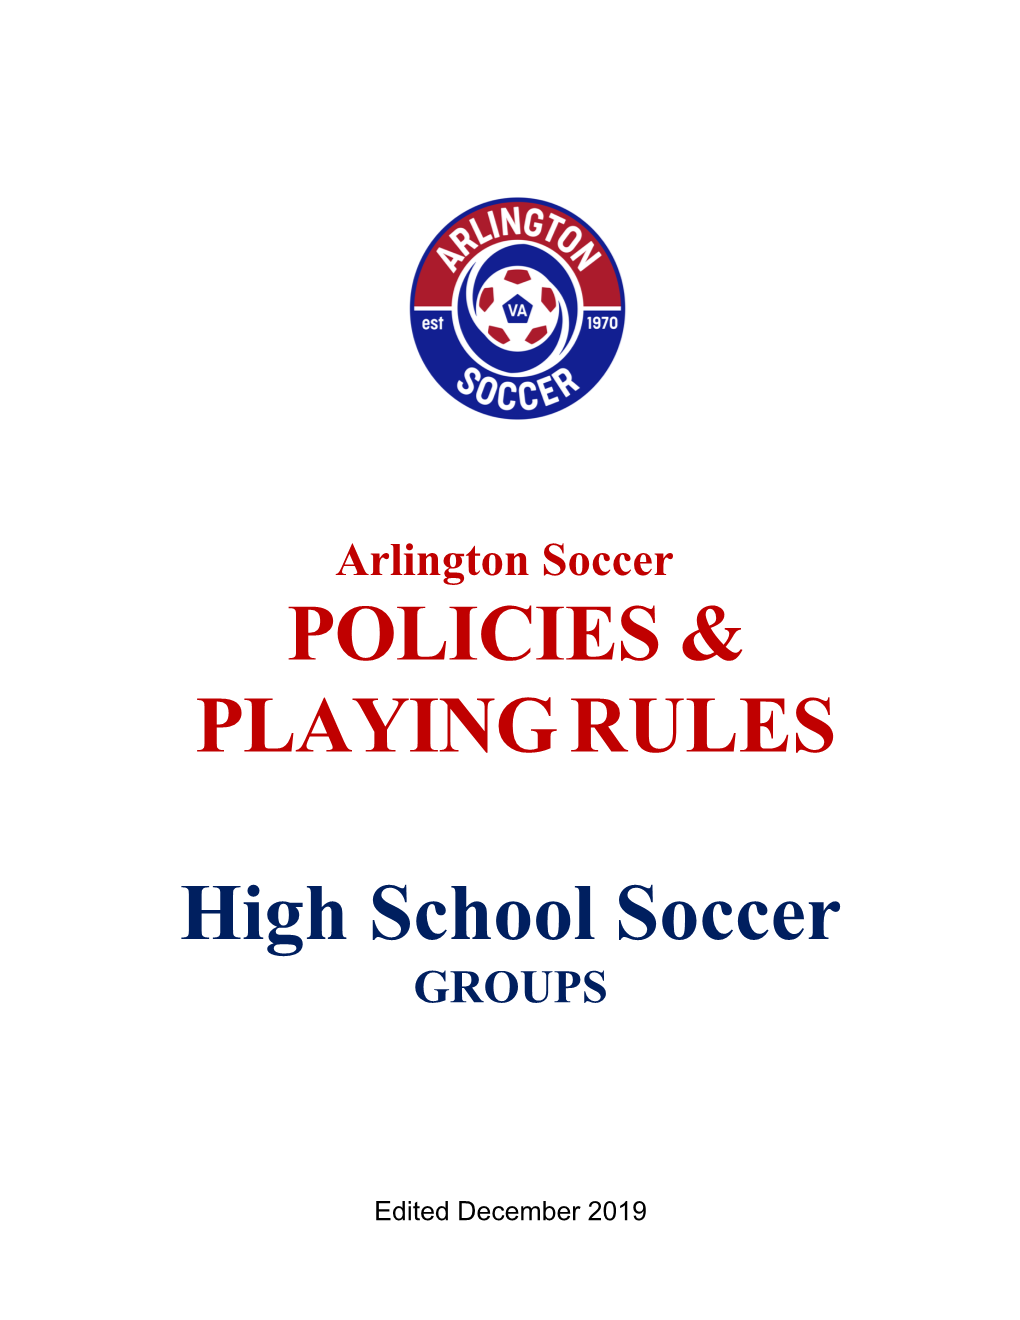 POLICIES & PLAYING RULES High School Soccer